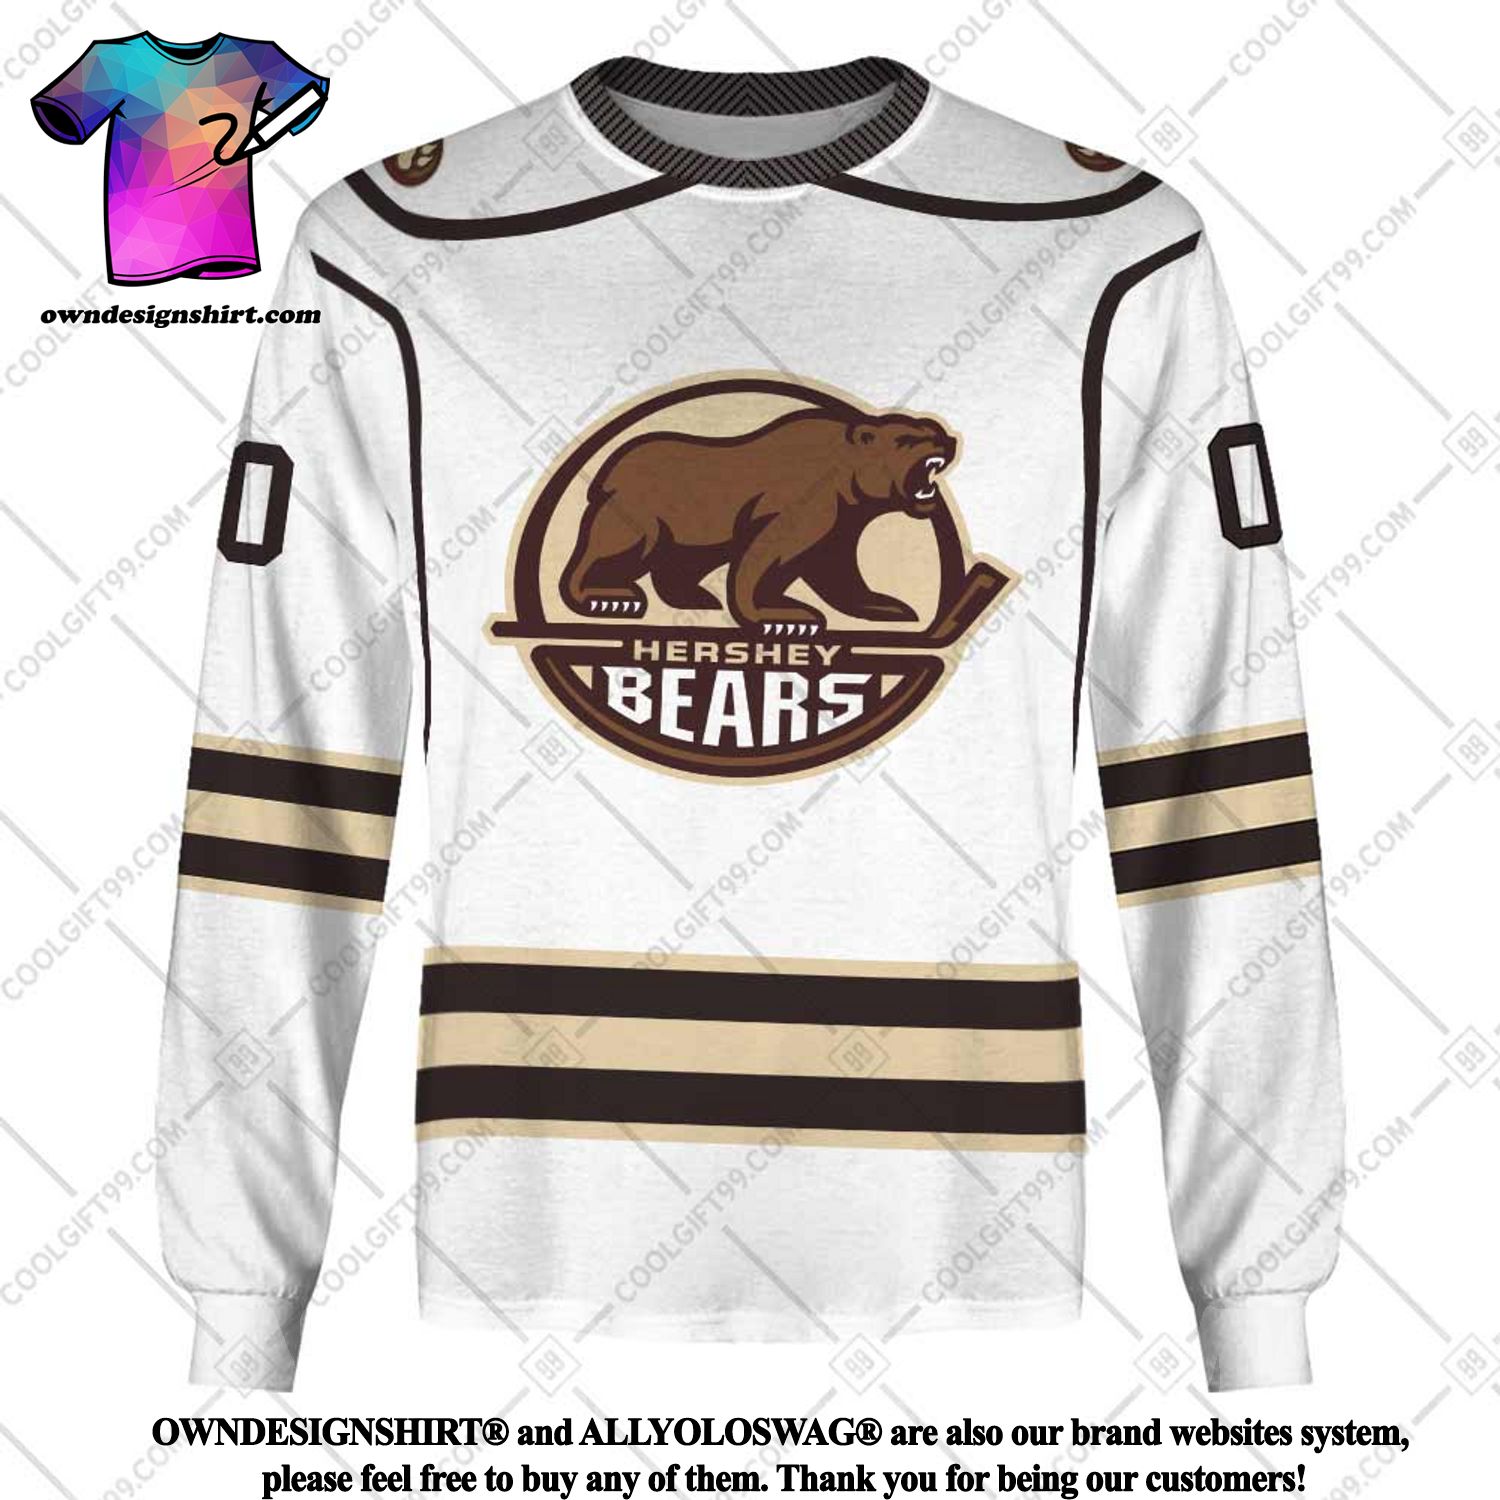 The best selling] Personalized AHL Calgary Wranglers Color jersey Style  High Fashion Shirt